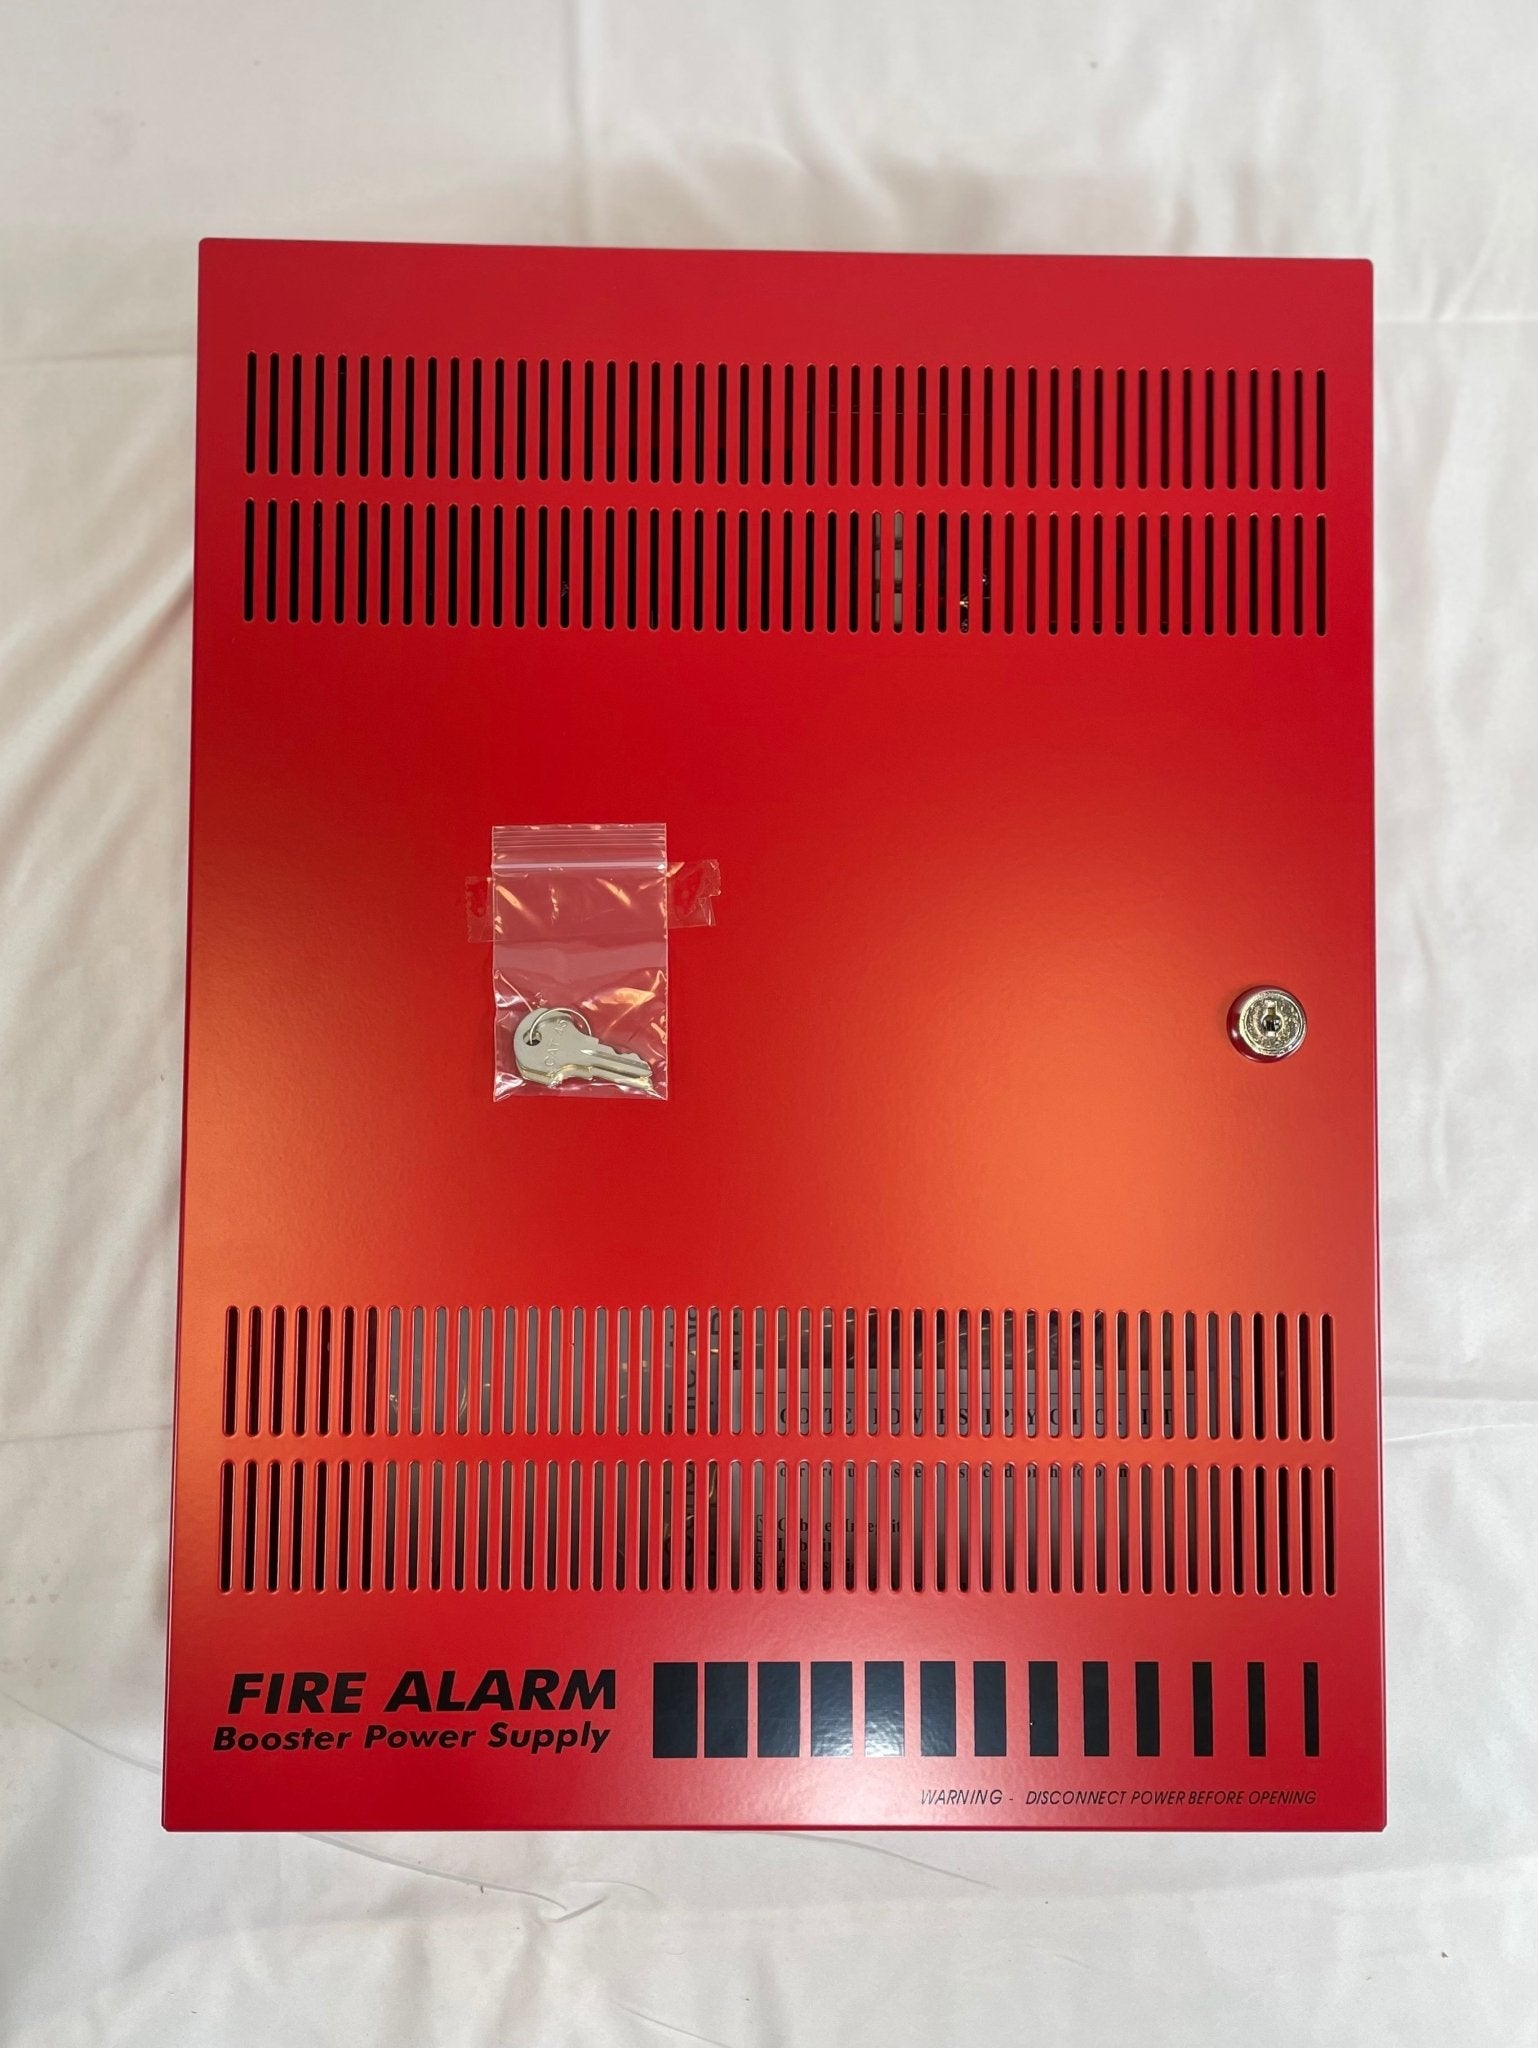 Edwards BPS10A - The Fire Alarm Supplier